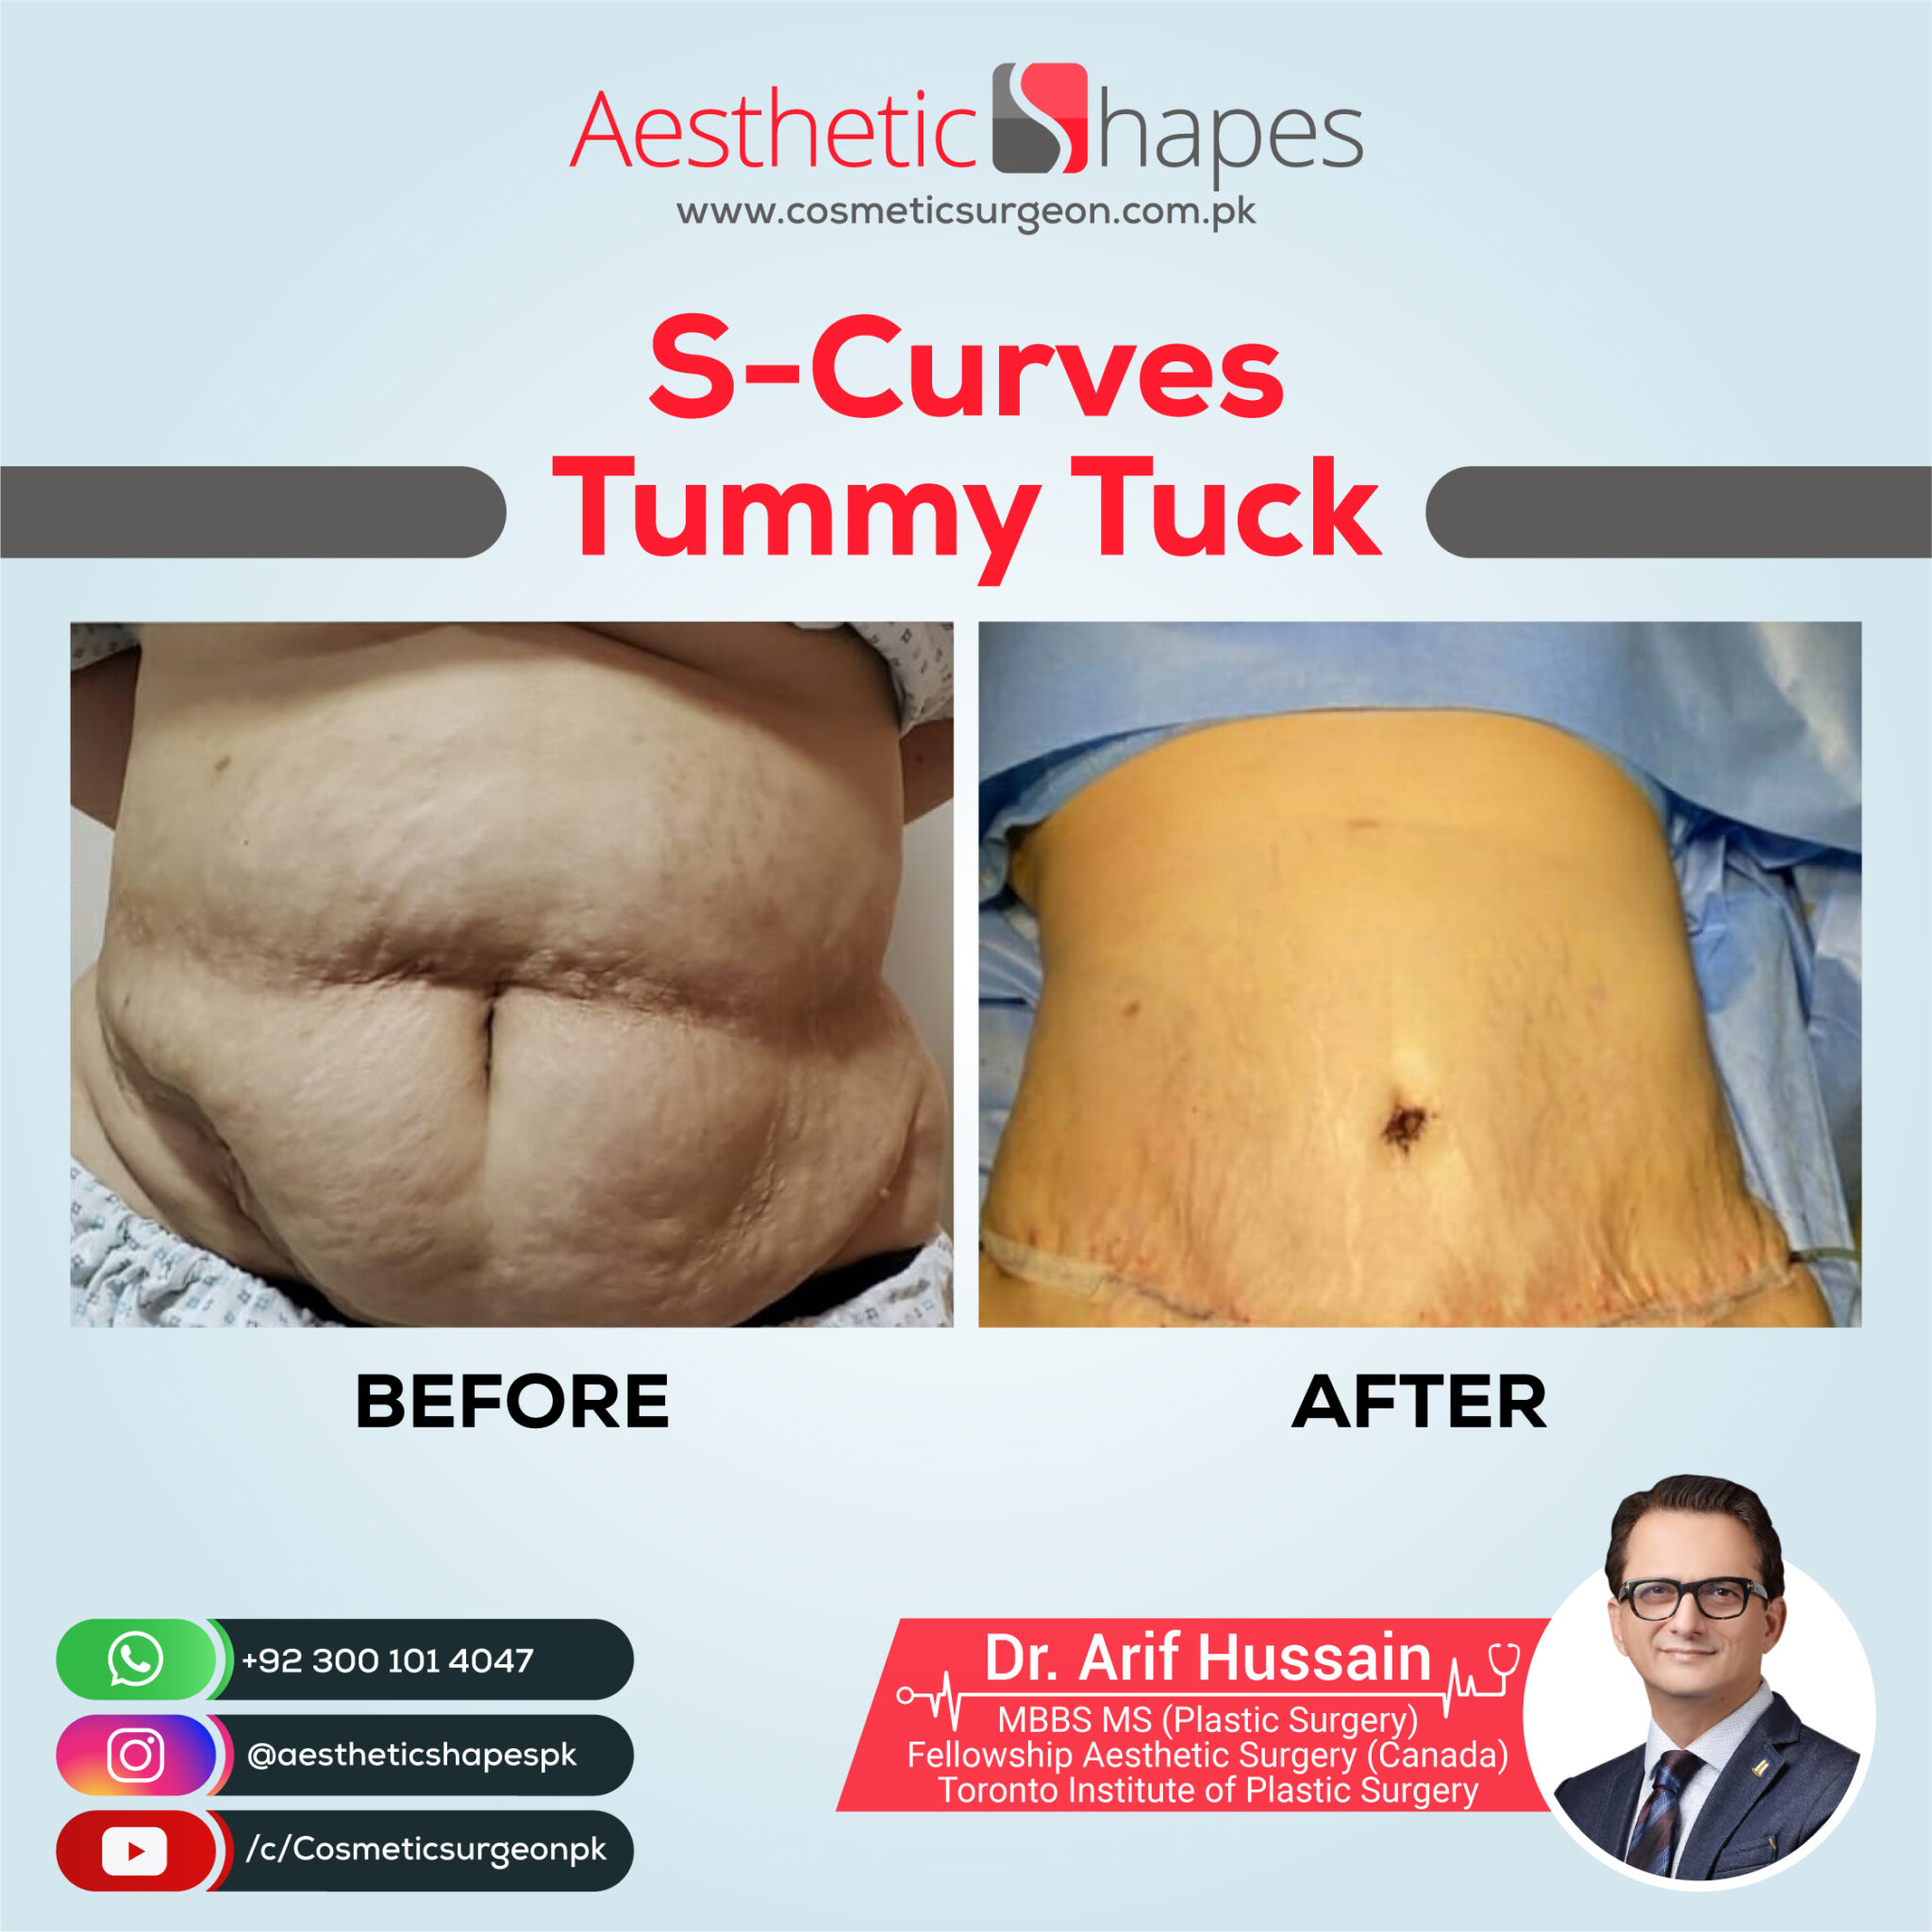 Will a tummy tuck give me my pre-motherhood body back?